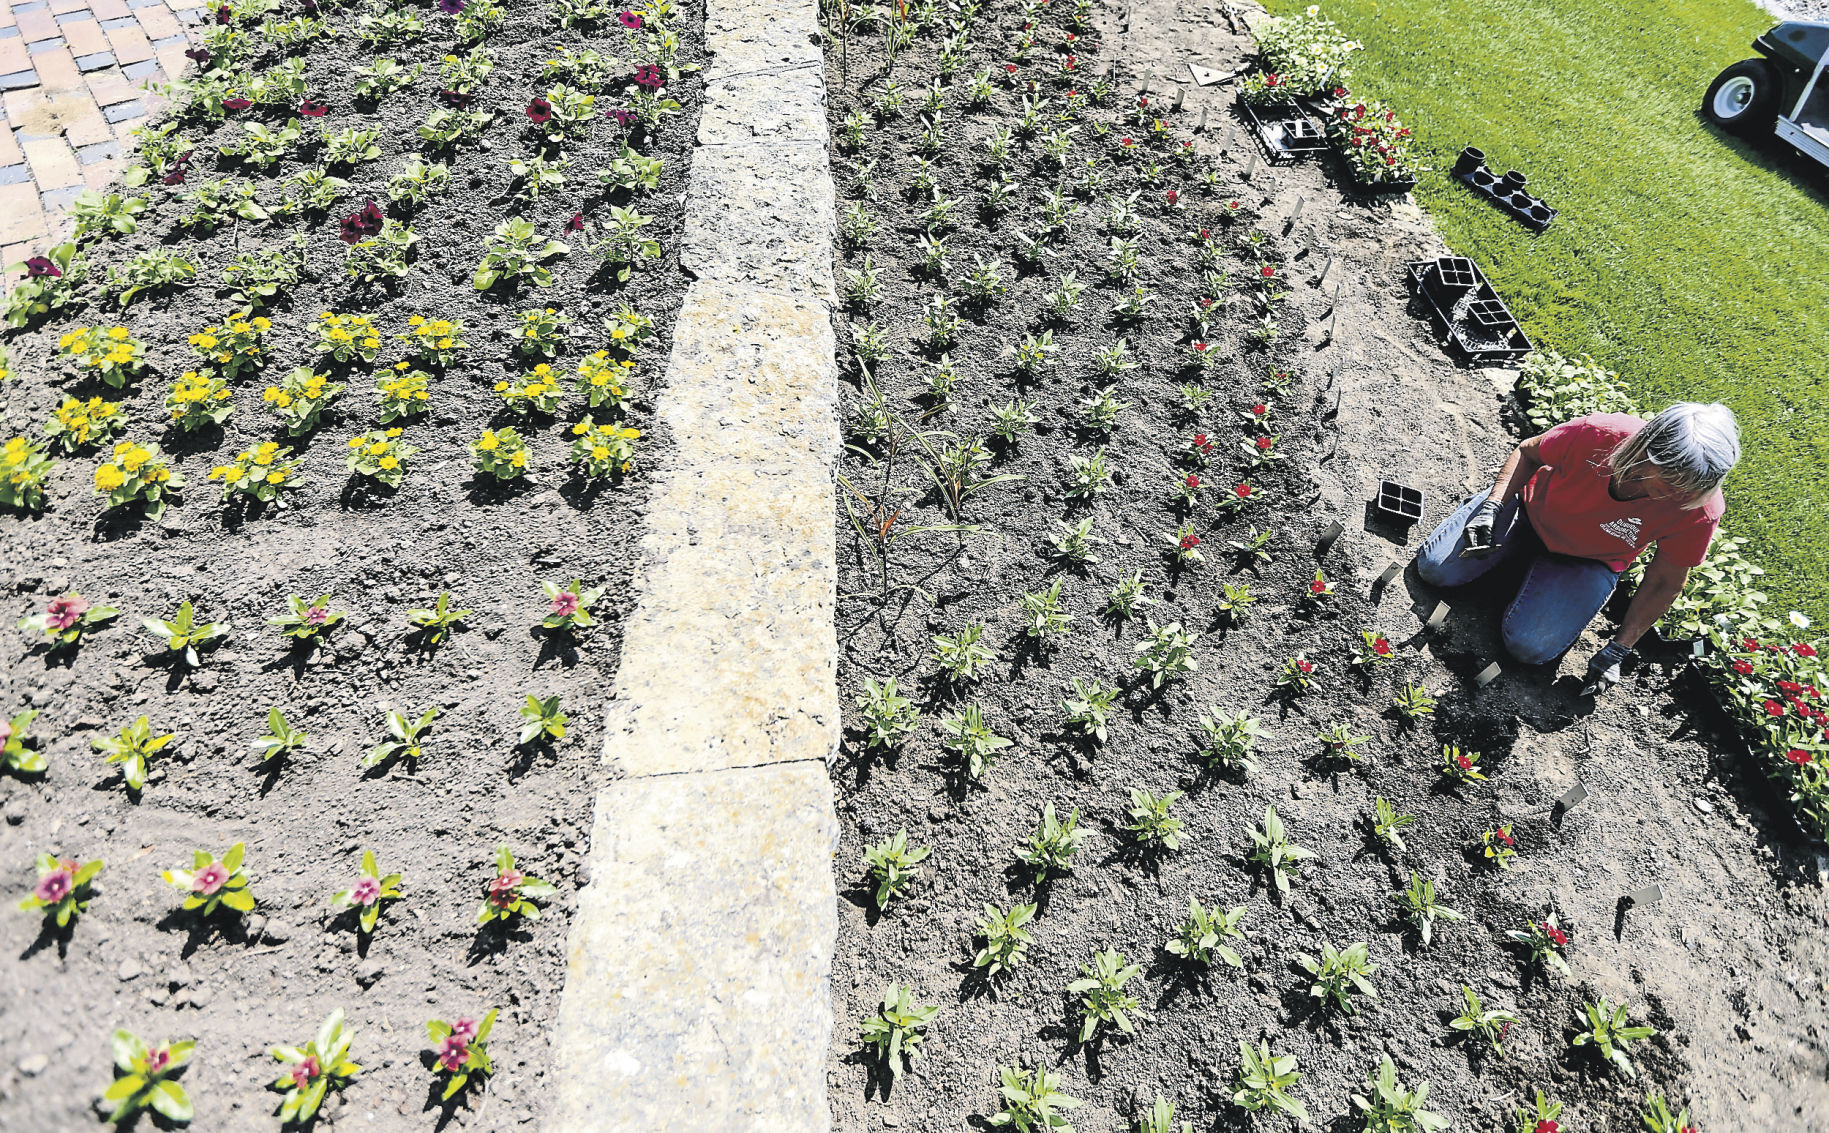 Volunteer Pat Puls helps plant hundreds of flowers at Dubuque Arboretum and Botanical Gardens.    PHOTO CREDIT: Dave Kettering